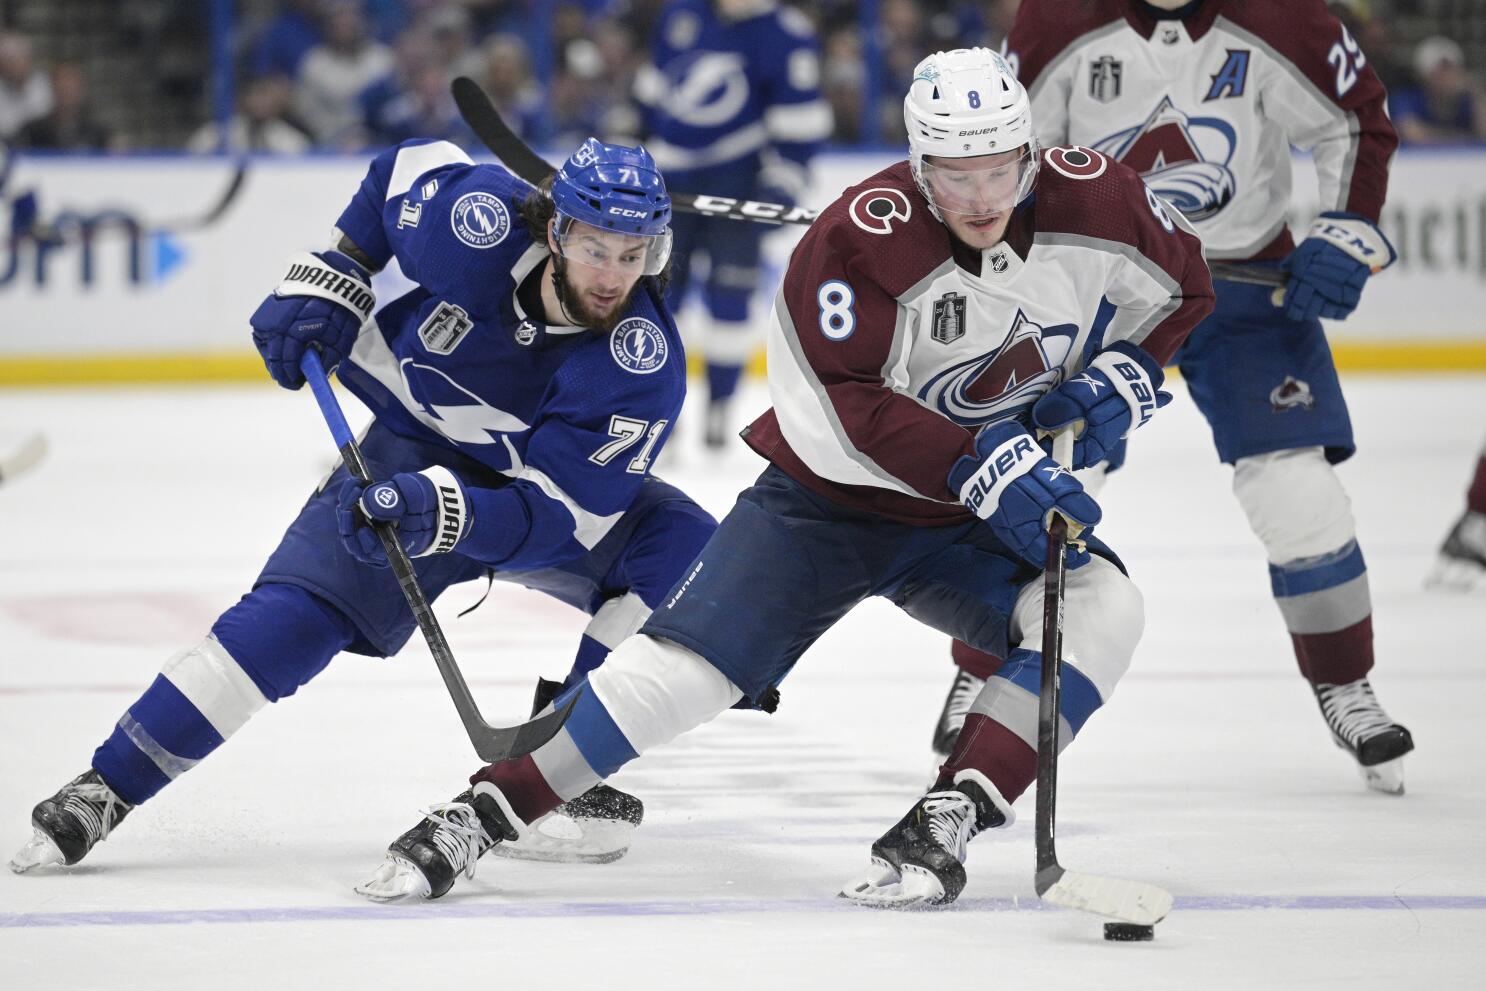 Colorado Avalanche: Which team did they used to be, relocated? Quebec